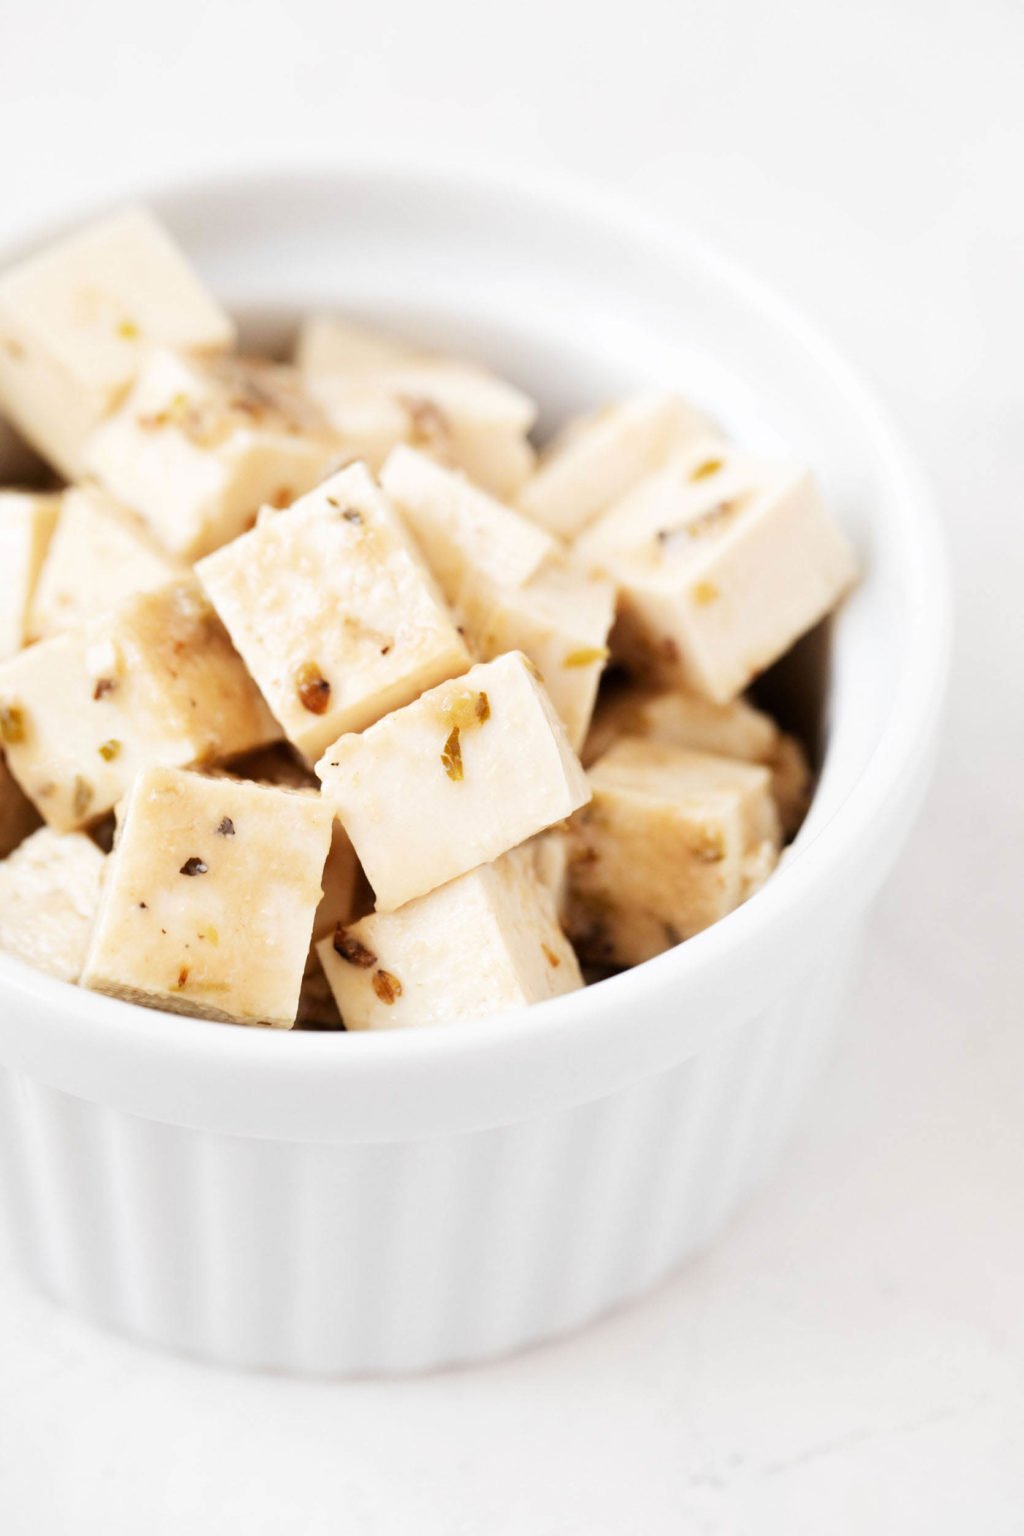 A round, white ramekin has been filled with small cubes of a vegan herbed tofu feta cheese.